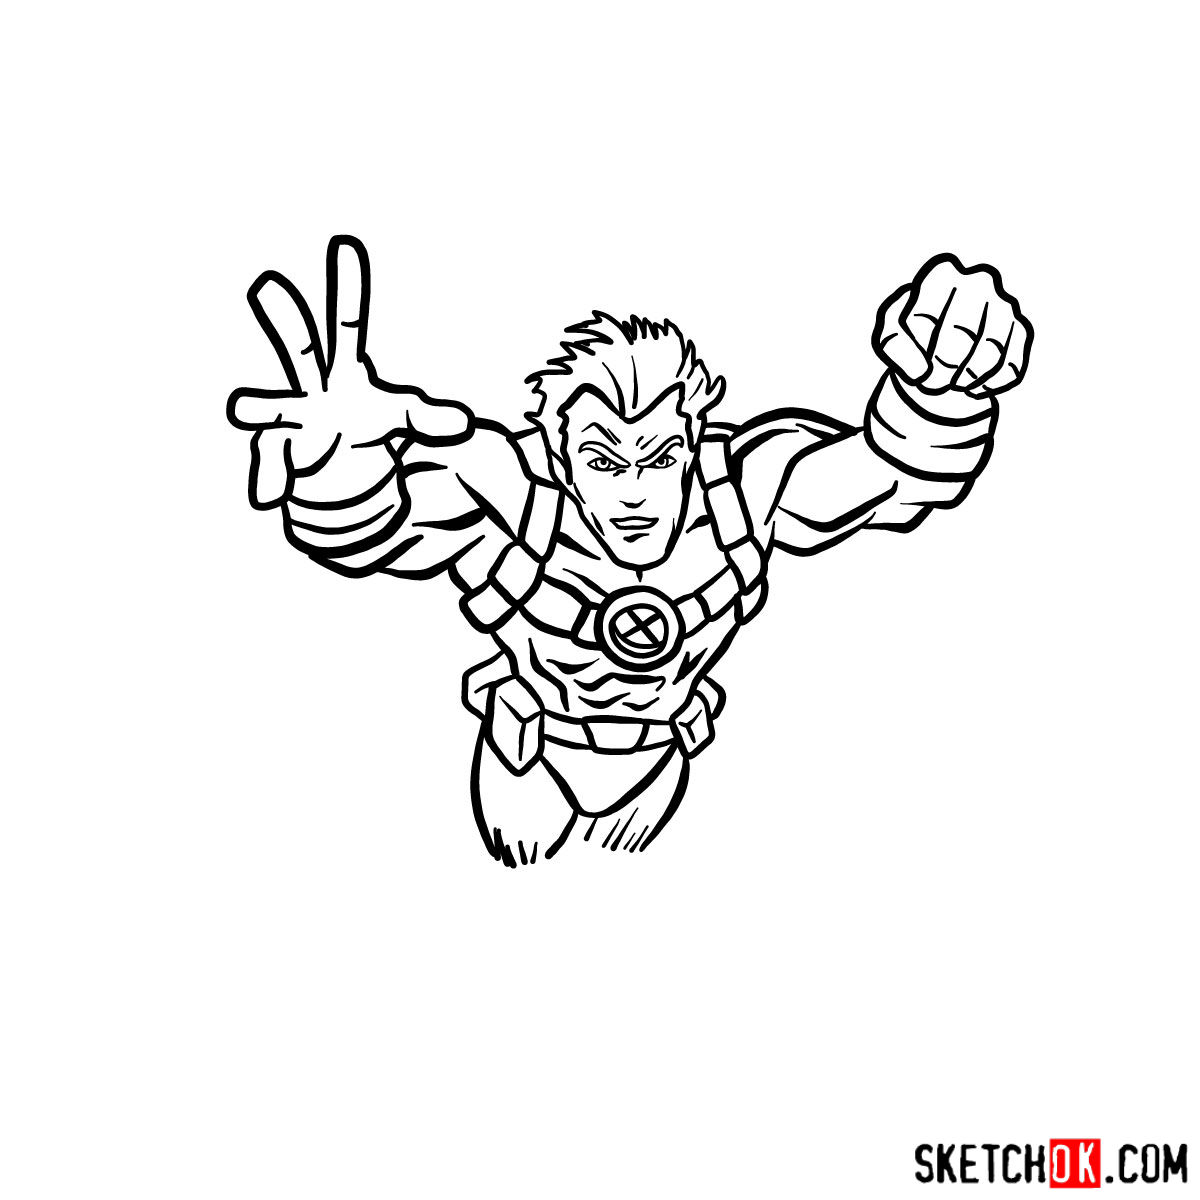 How to draw Cannonball, a mutant from X-Men series - step 11